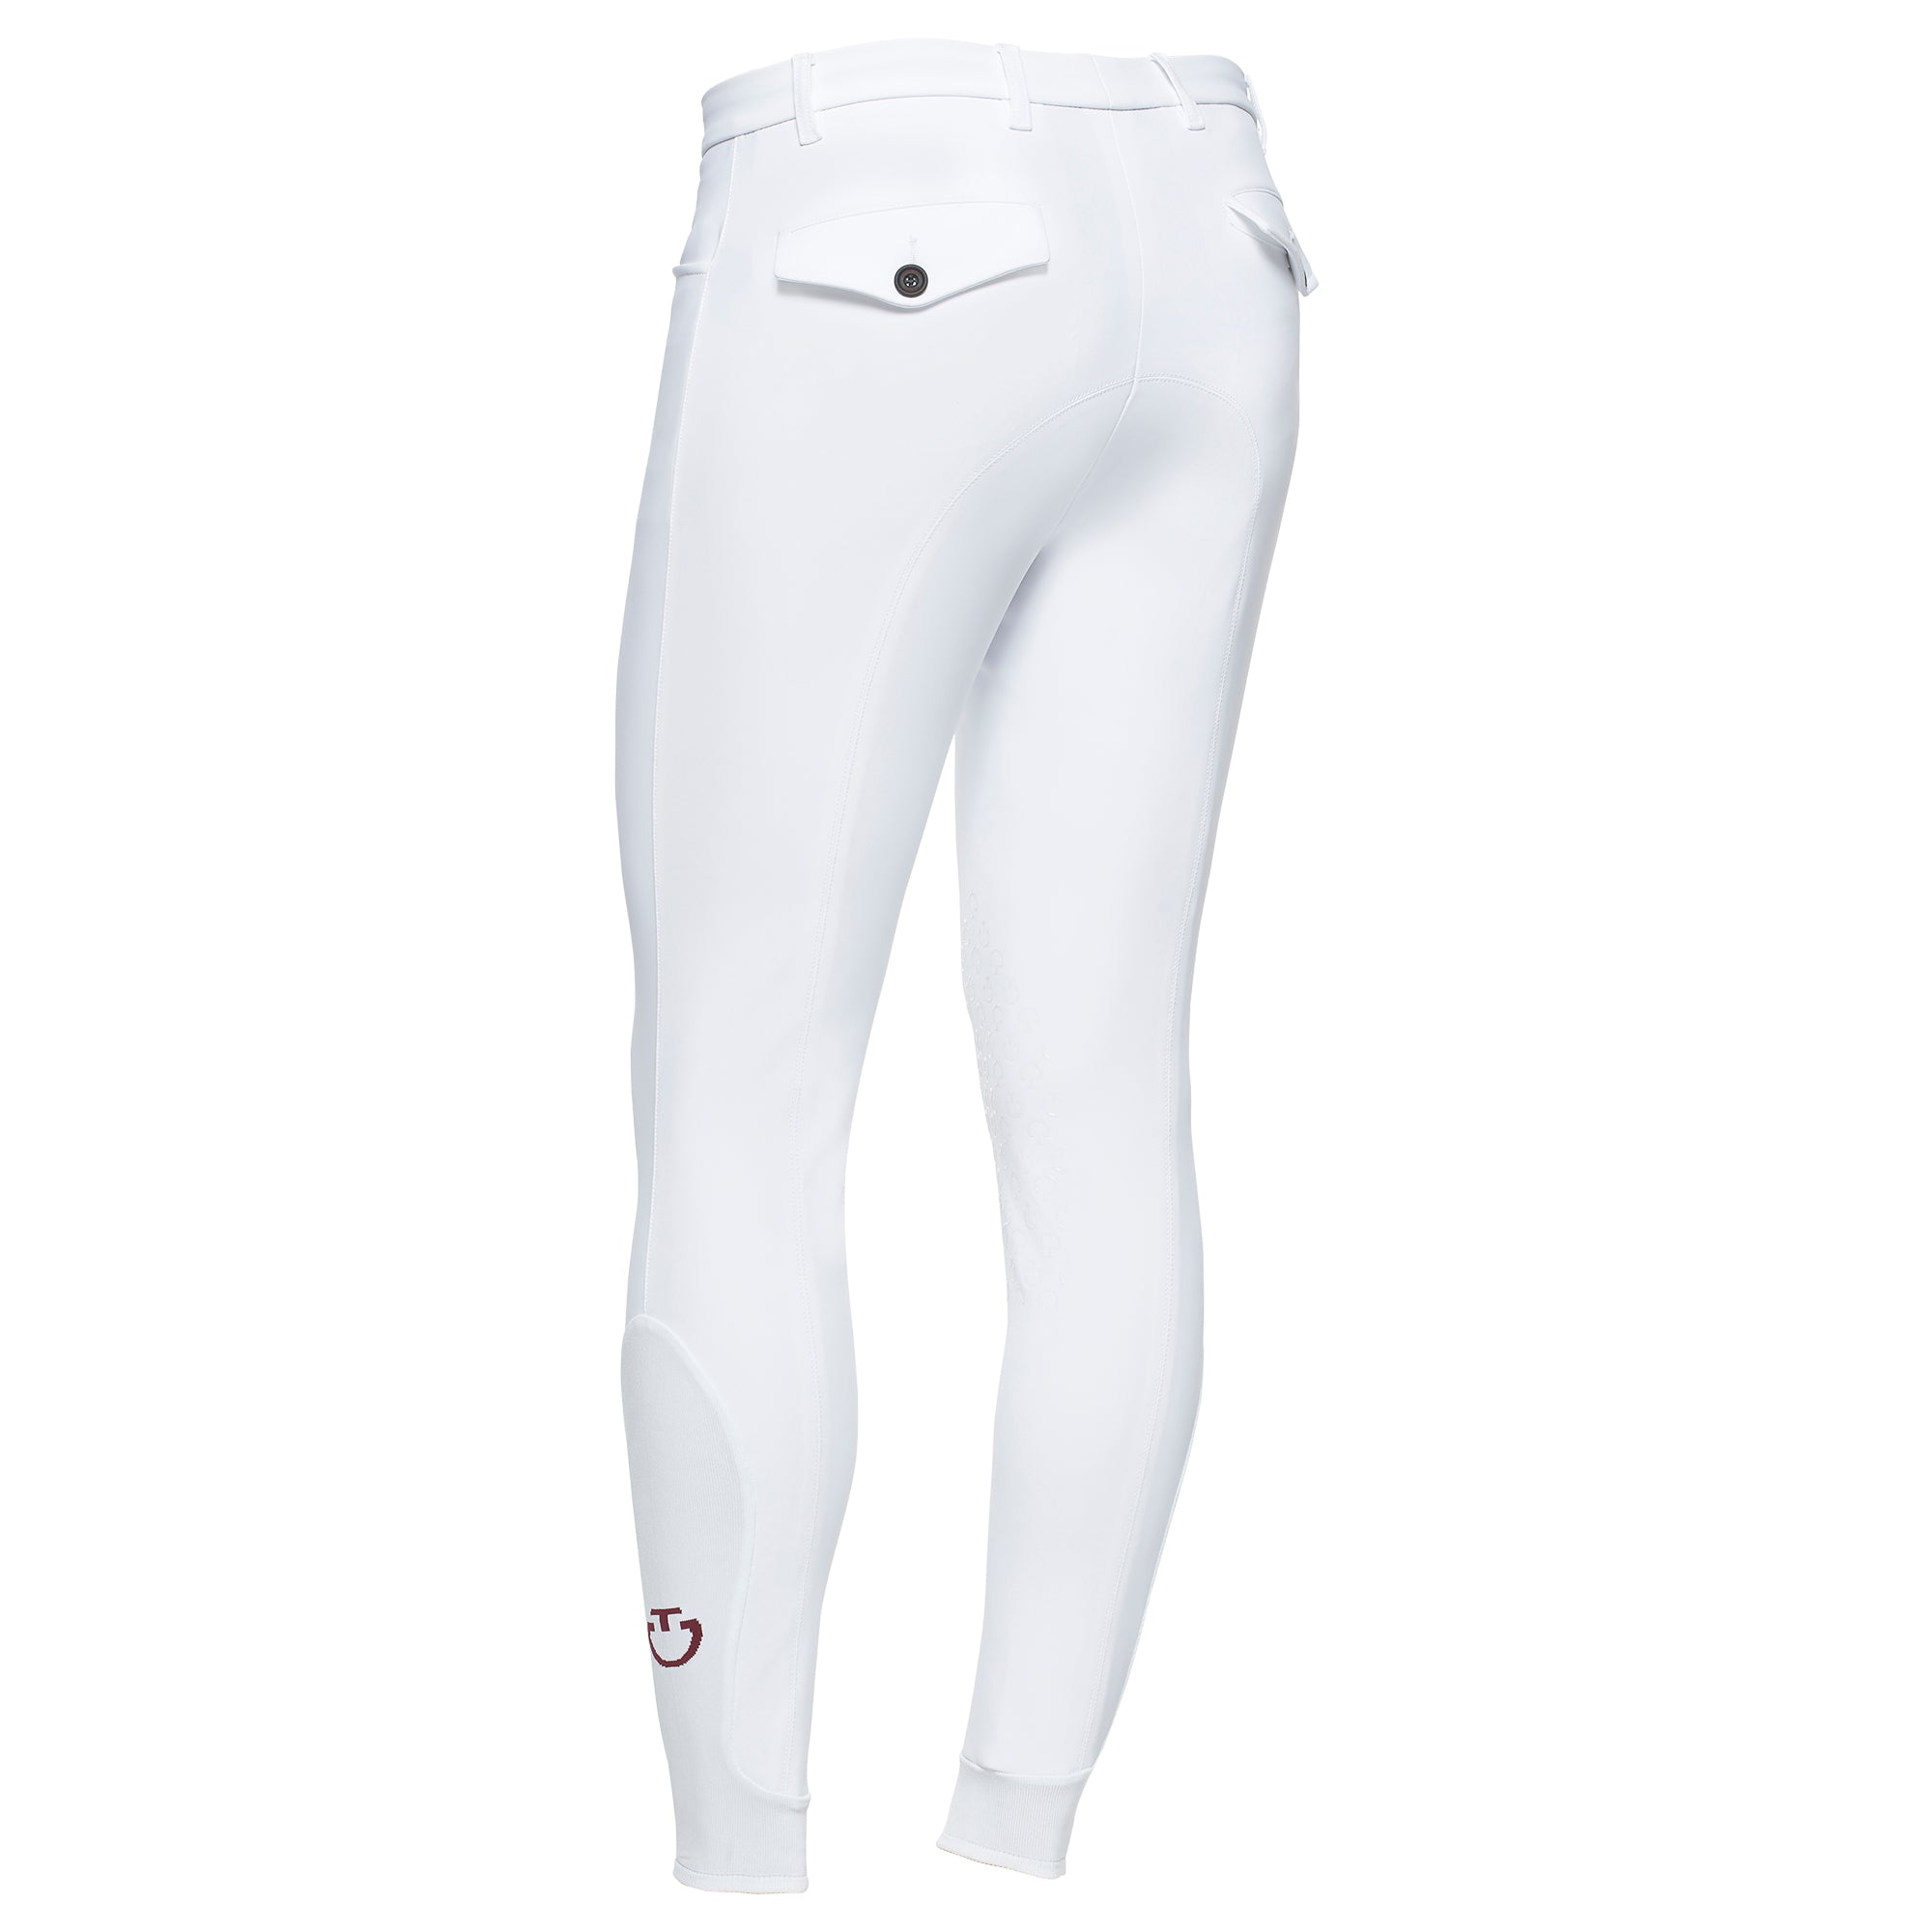 Men's competition trousers with New Grip